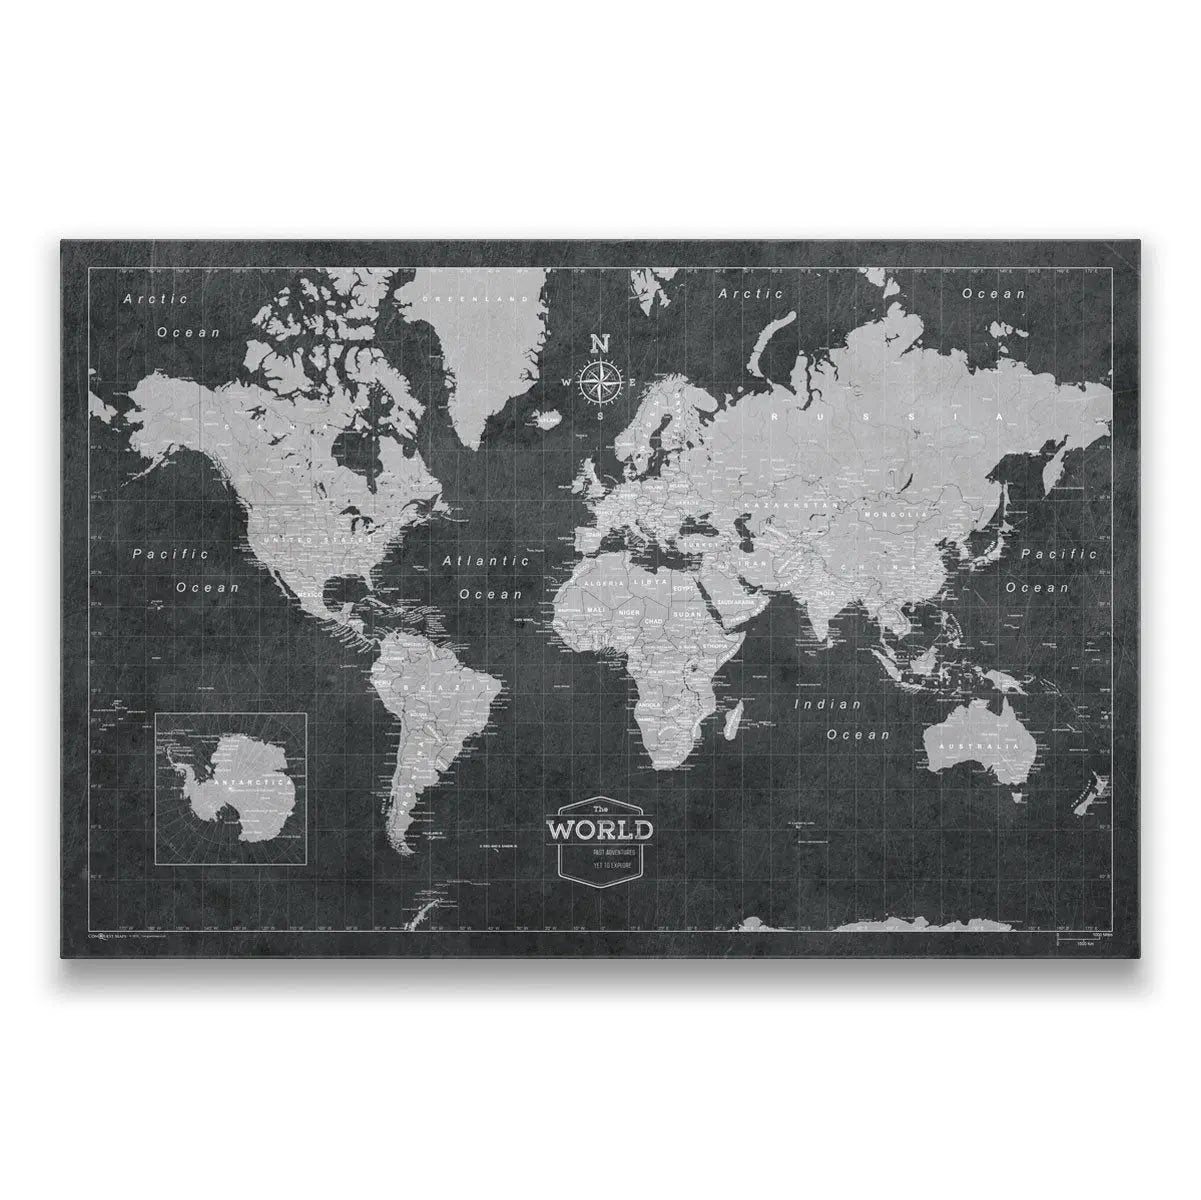 Oops, We Made Too Much - 30% Off Overstock Map Styles!